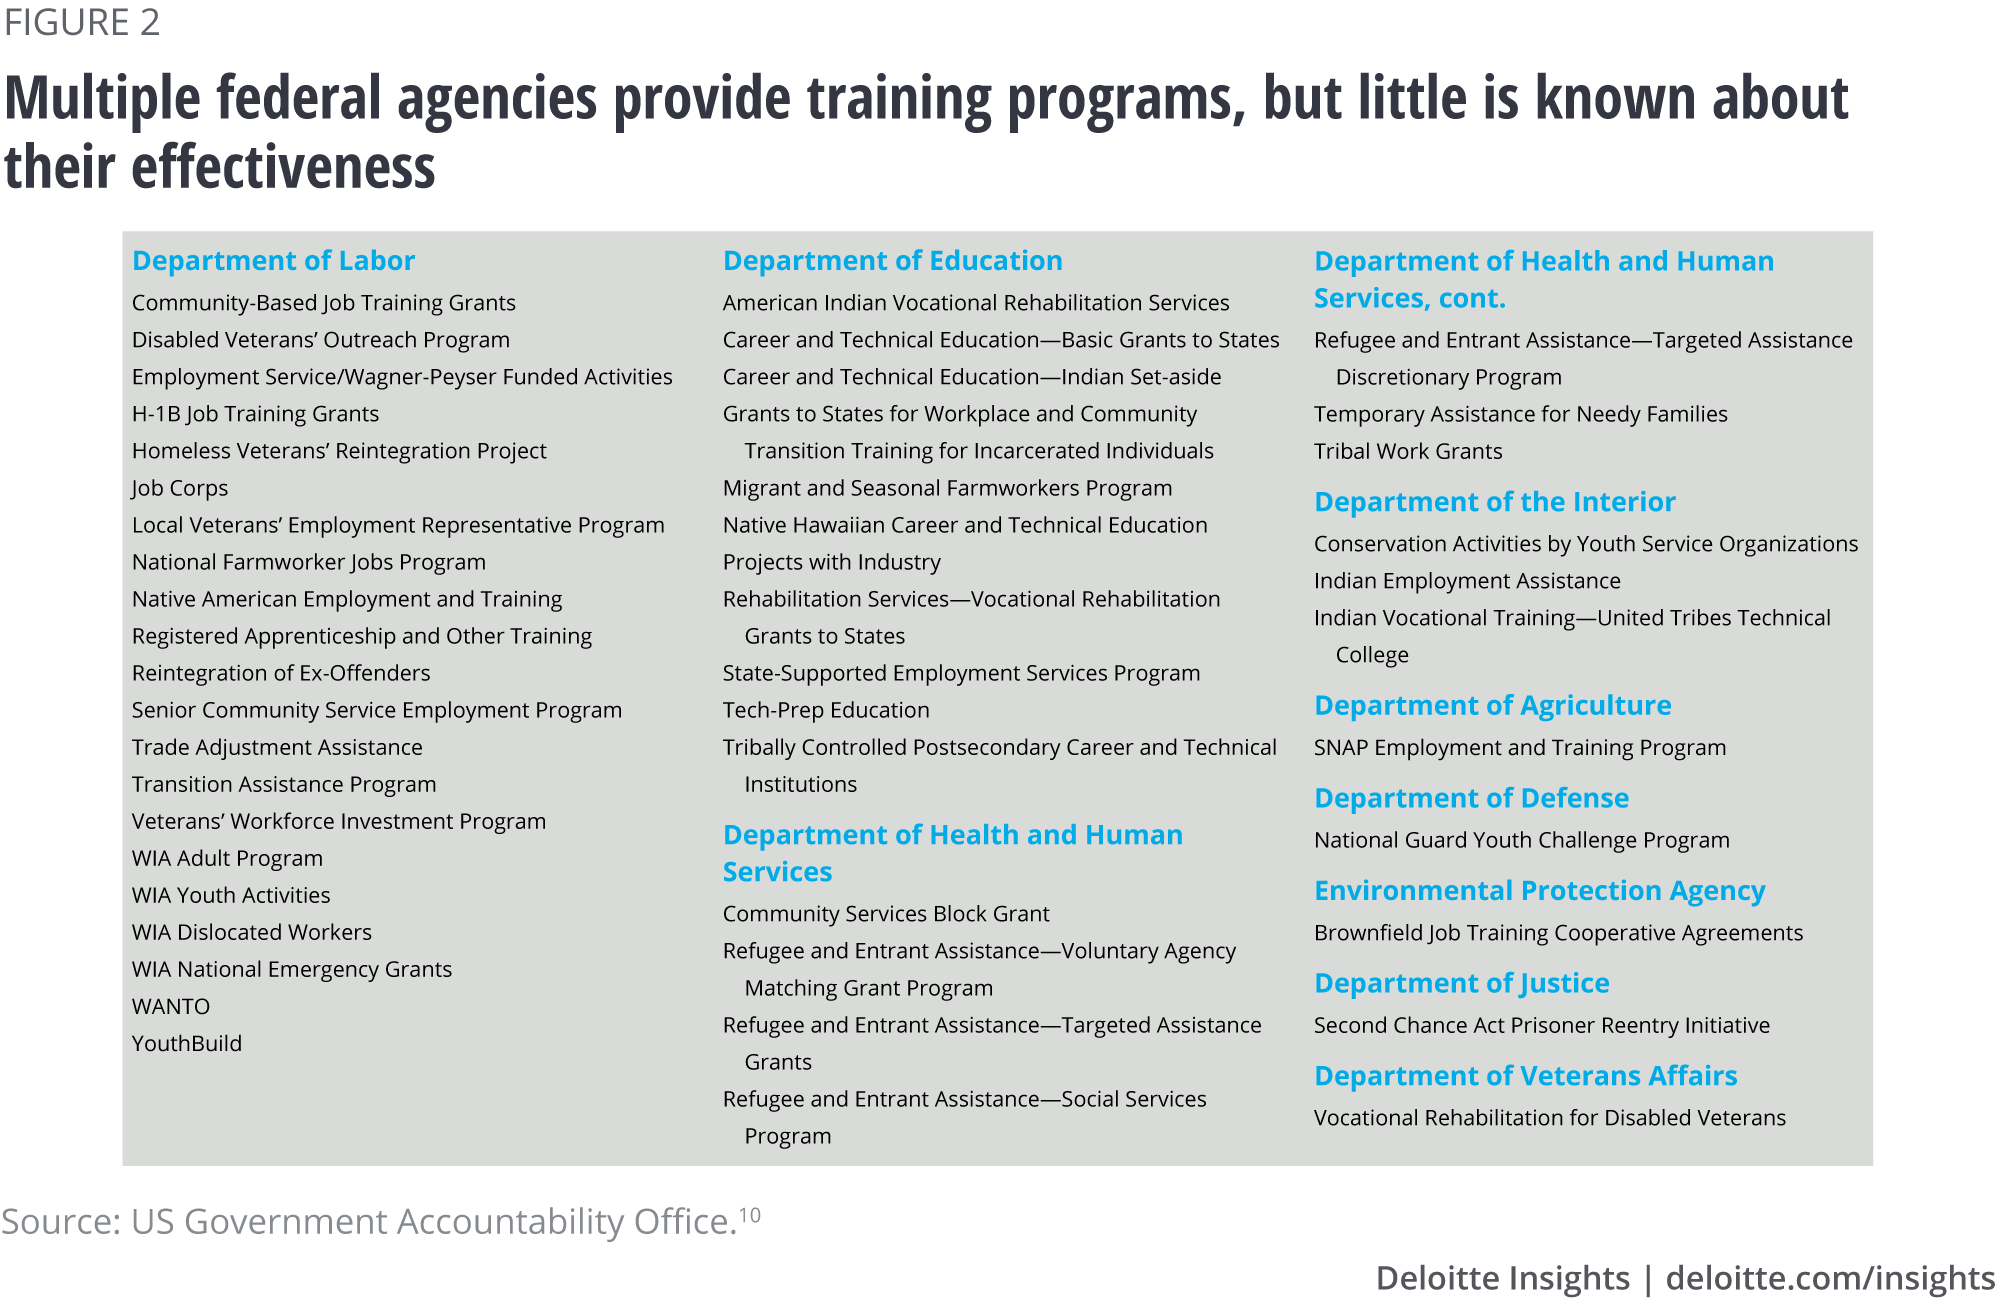 Multiple federal agencies provide training programs, but little is known about their effectiveness